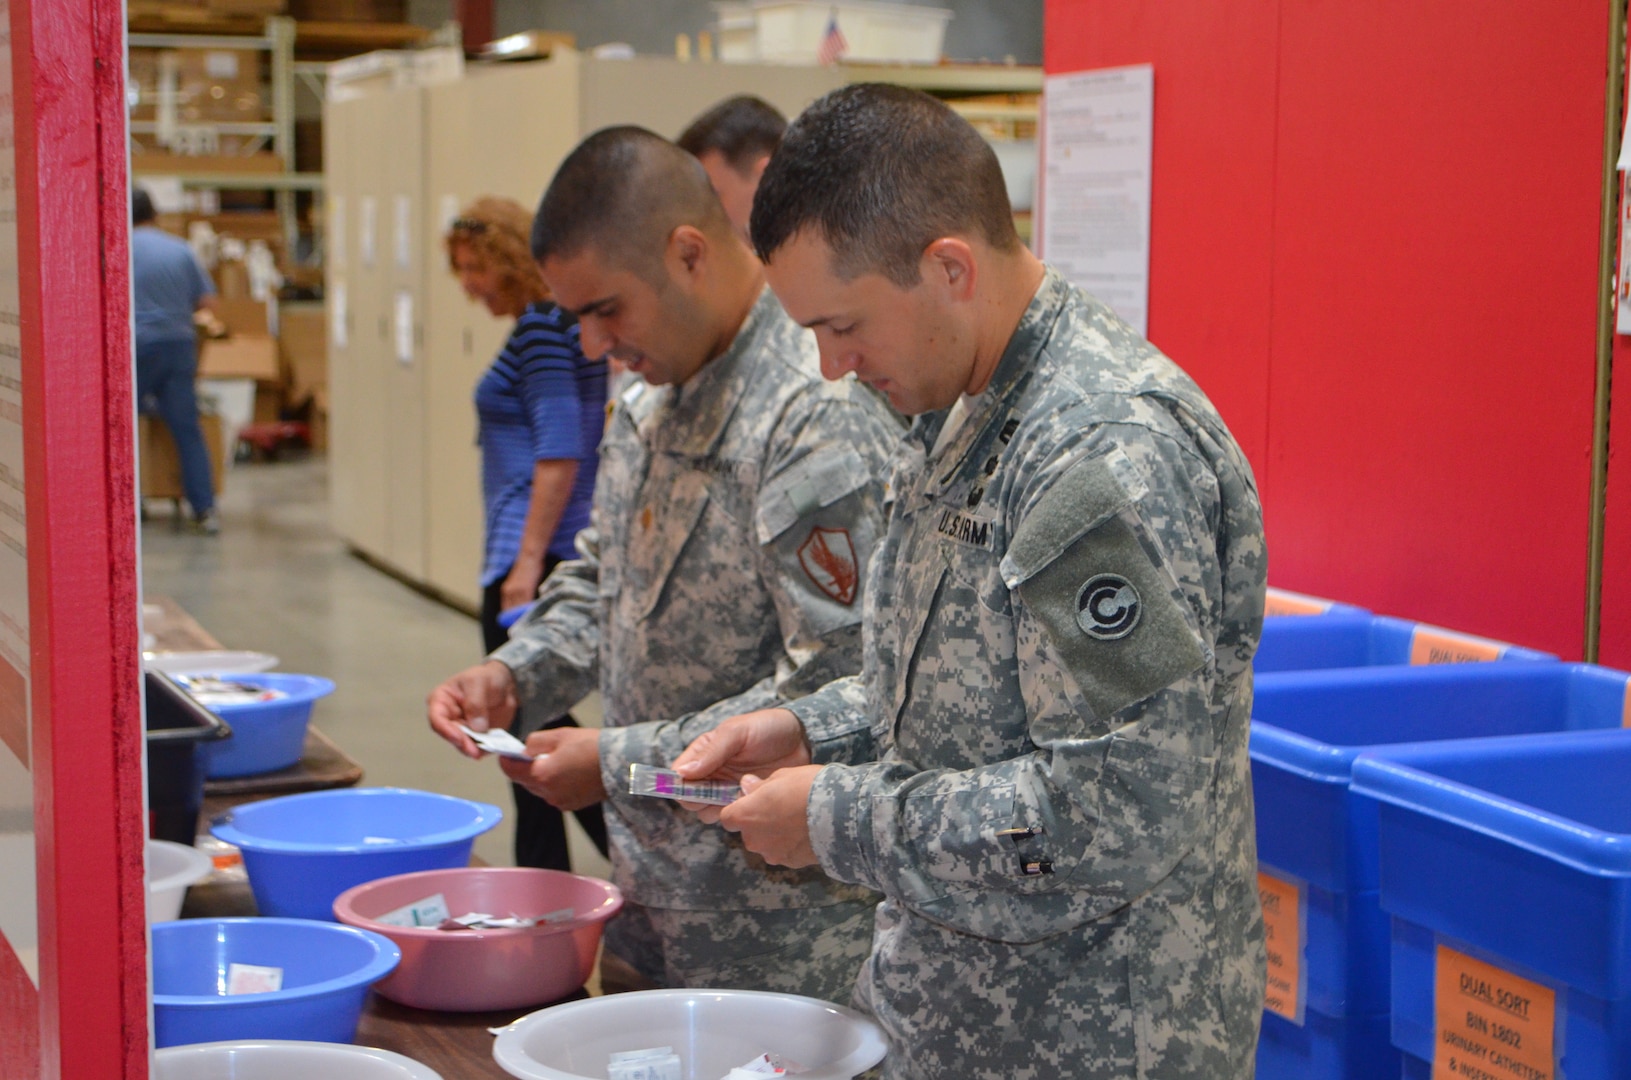 Maj. Ashkan Angha and Capt. Derek Richter sort various donated medical supplies at Project CURE’s International Headquarters in Centennial, Colorado, June 26, 2015  The 50,000 square foot warehouse stores donated medical supplies and equipment until transported to a country in need.  Recently Project CURE, with the help of the Colorado National Guard’s State Partnership Program, donated a 20 foot shipping container full of medical supplies and equipment to the Hashemite Kingdom of Jordan in support of the Syrian and Iraqi refugees. (Photo by U.S. Air Force Lt. Col. Nicole David/Released)